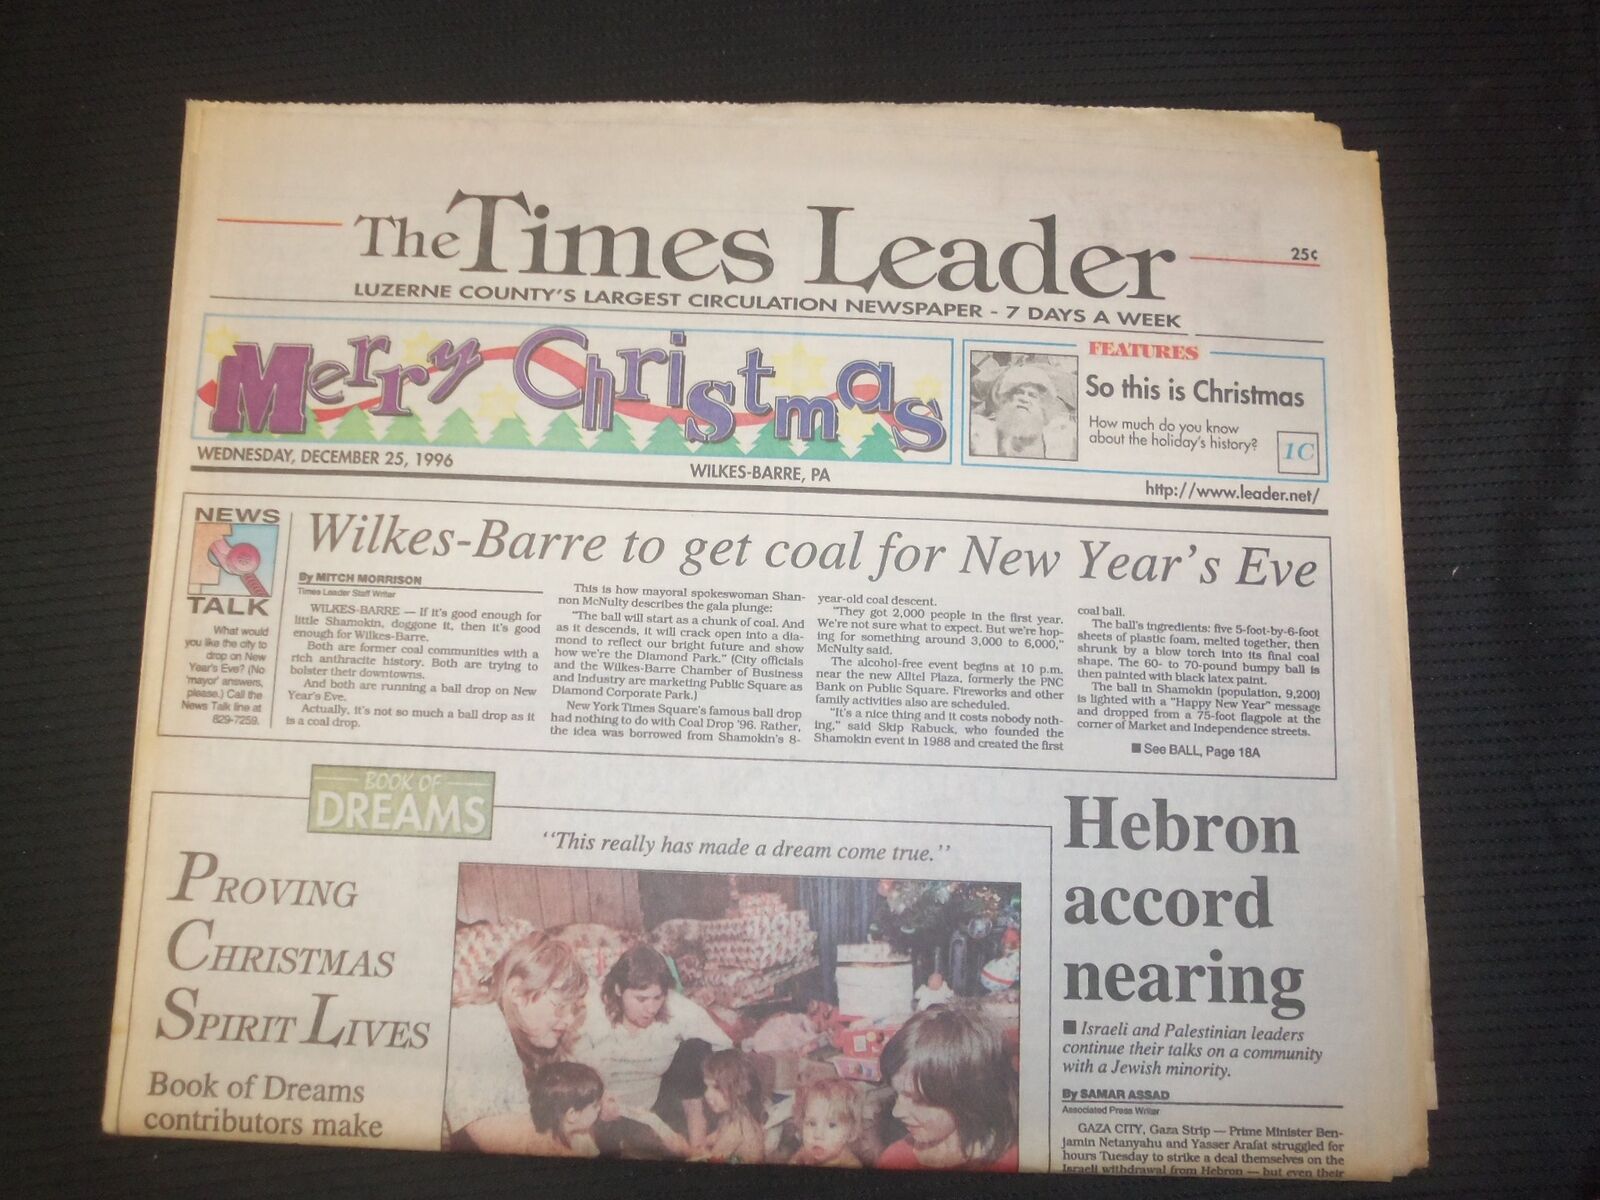 1996 DECEMBER 25 WILKES-BARRE TIMES LEADER - HEBRON ACCORD NEARING - NP 7600